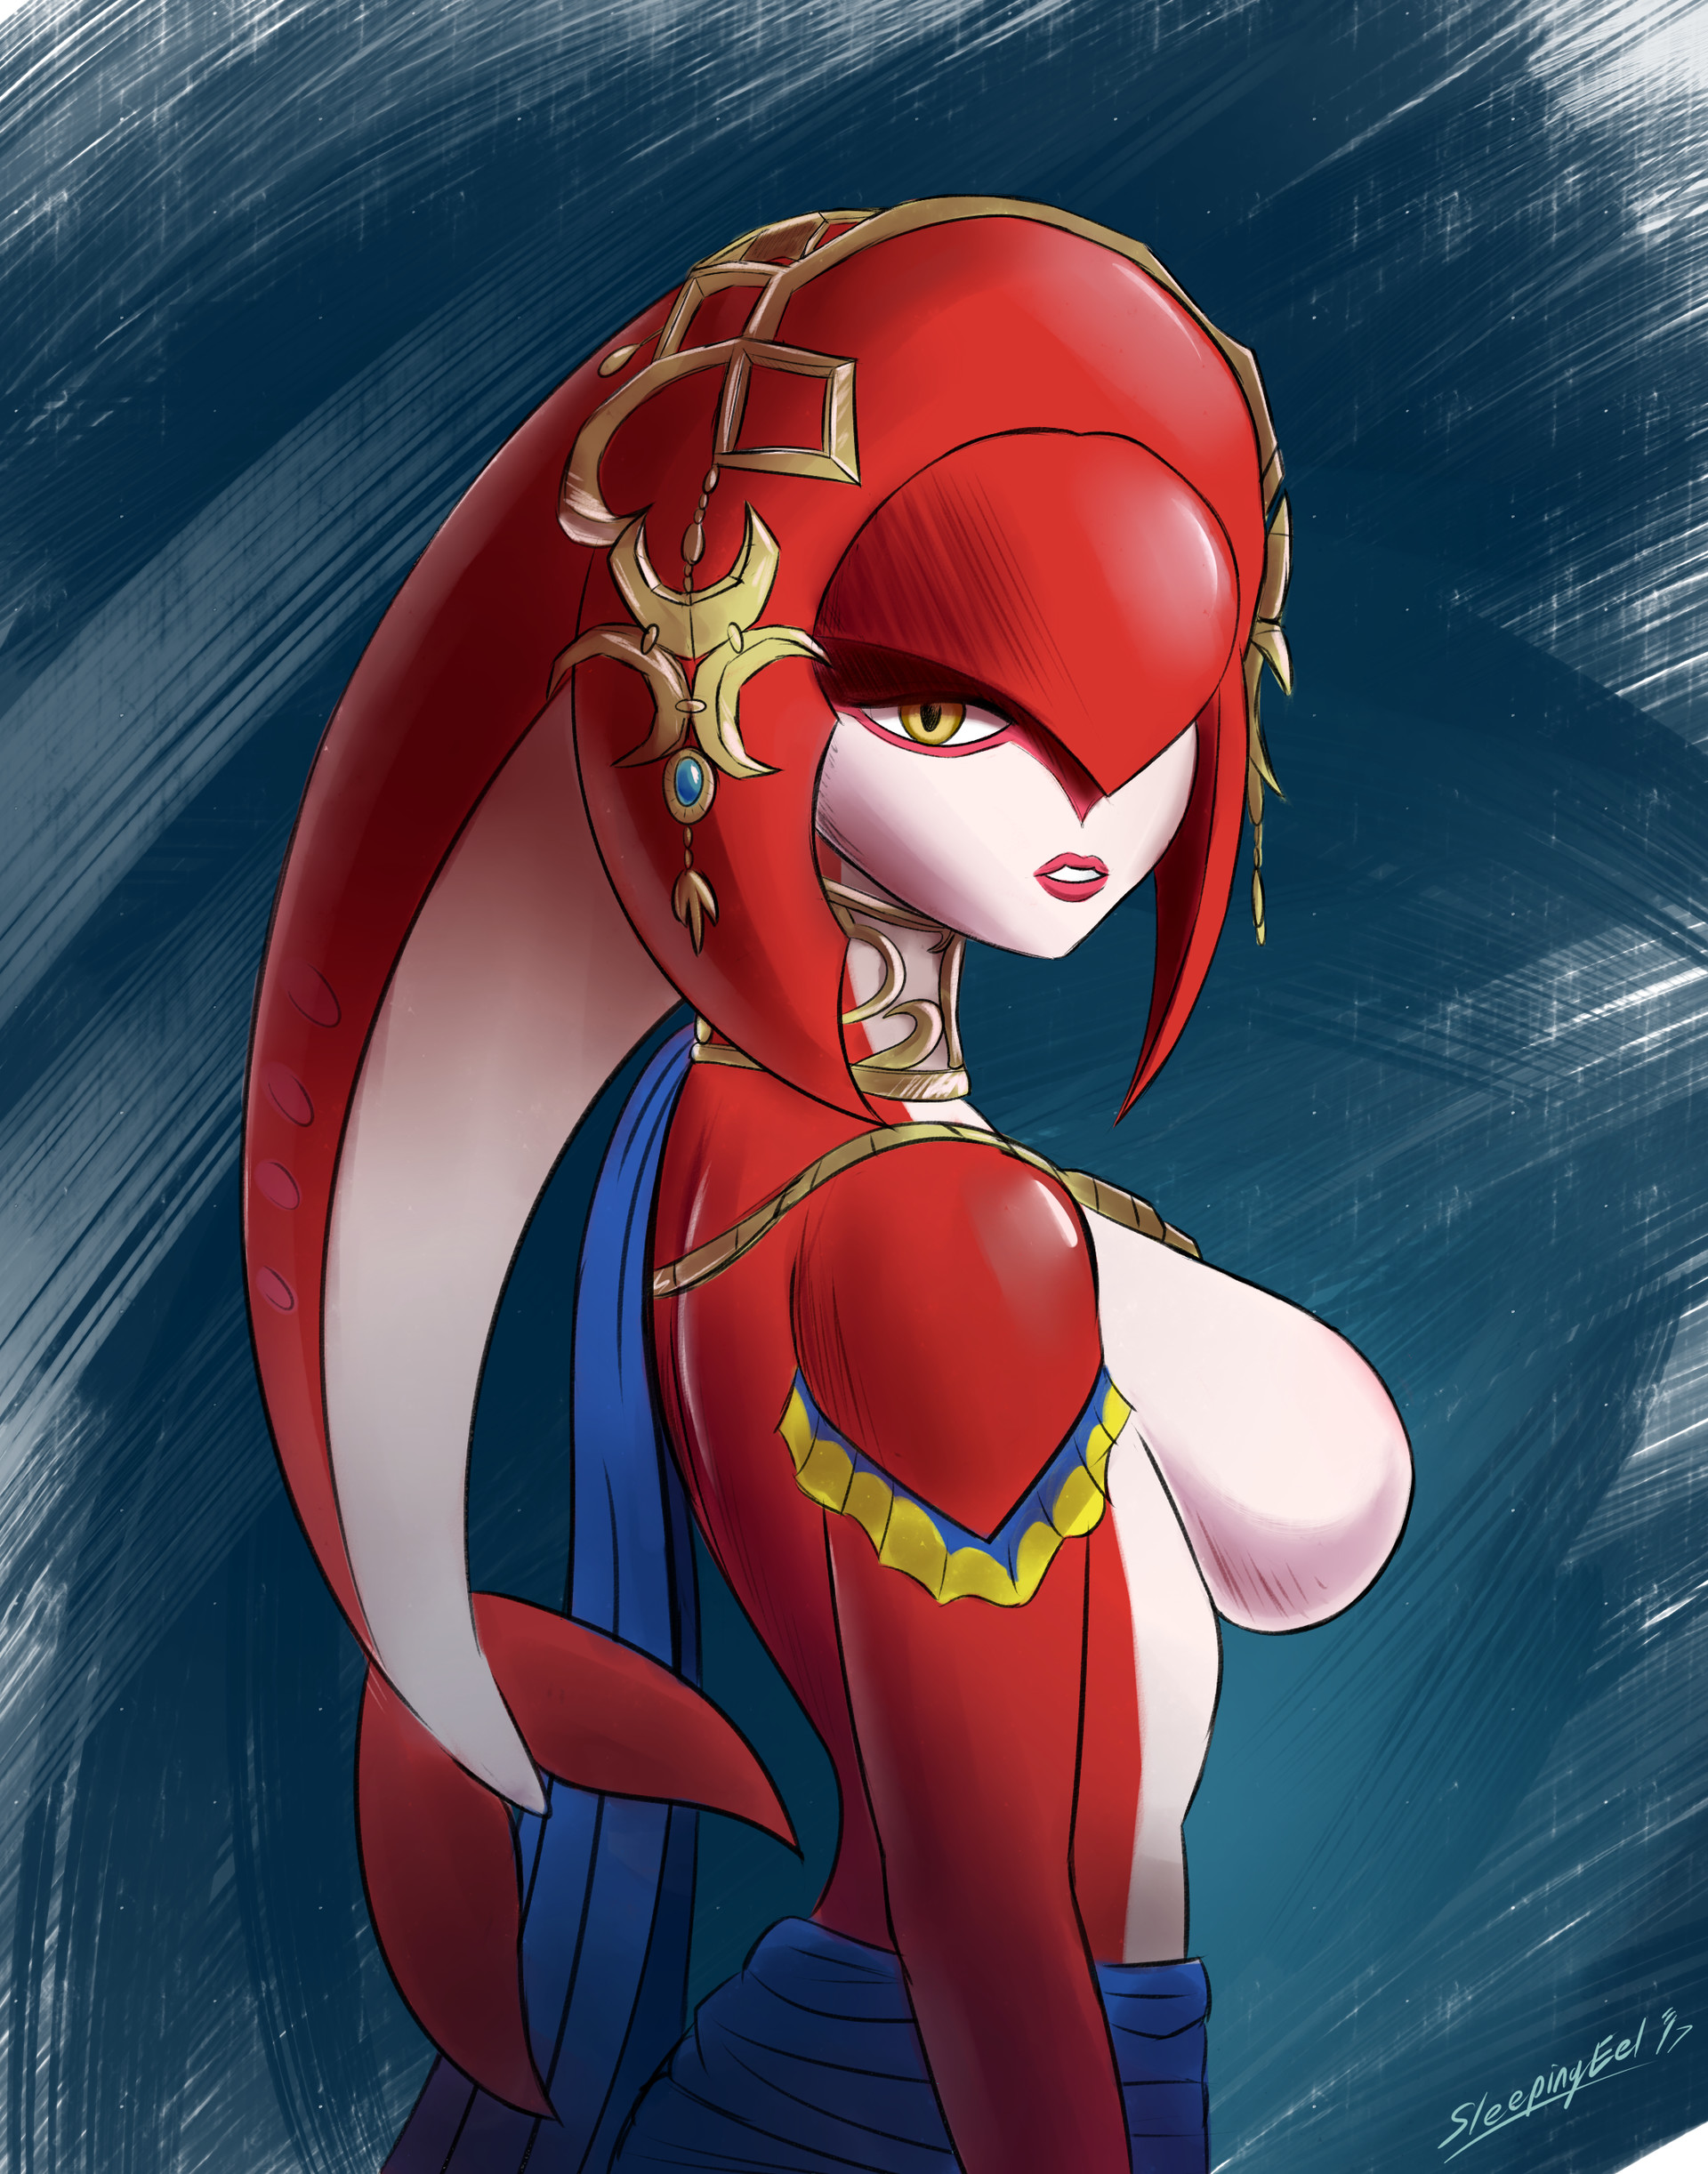 Mipha of Breath of the Wild.